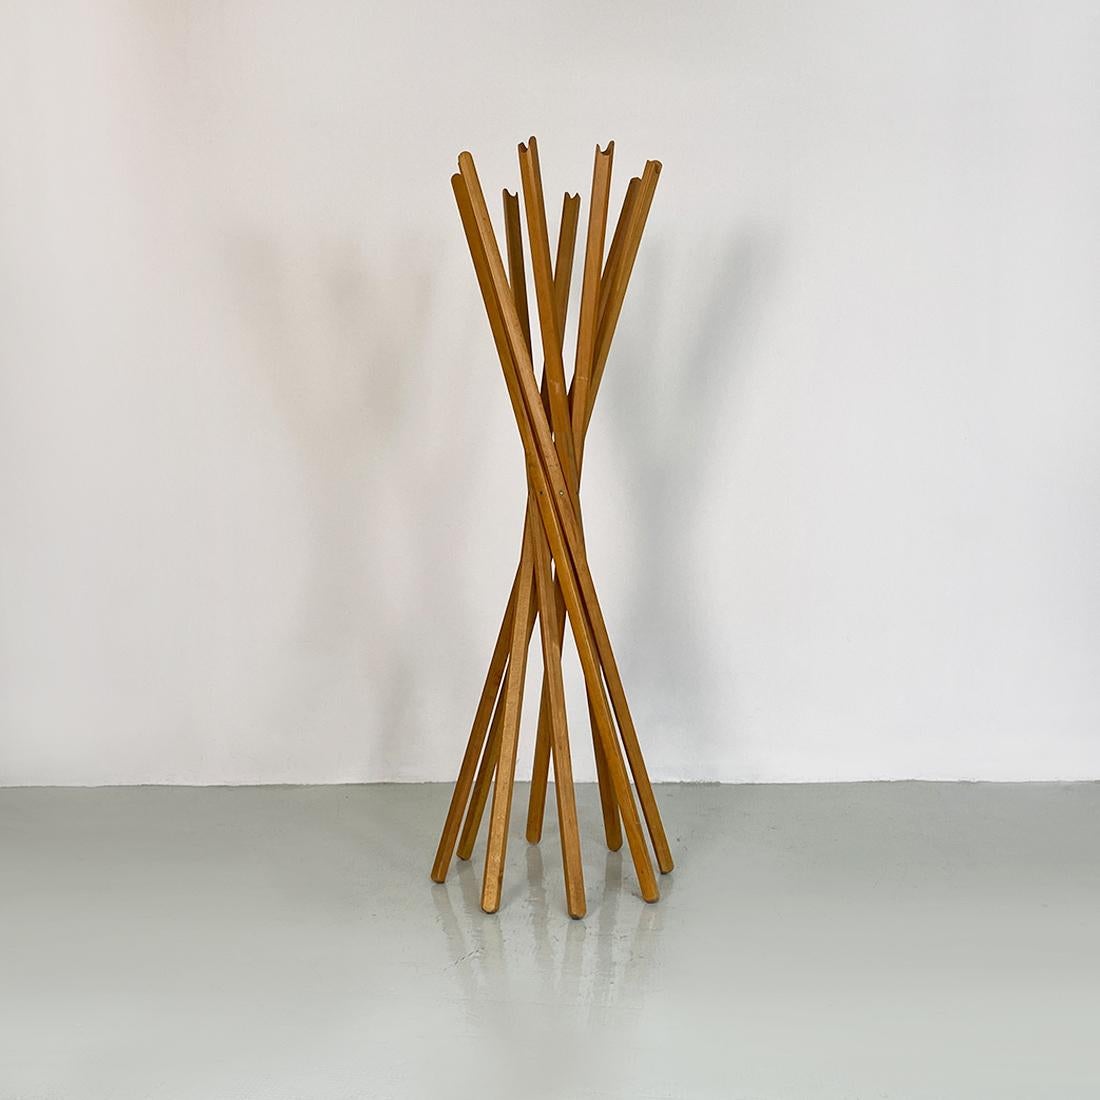 Italian beech Sciangai coat stand by De Pas, D'Urbino, Lomazzi for Zanotta, 1979
Sciangai model coat hanger, with structure entirely in solid beech made up of eight strips that can be jointed simultaneously by means of a single metal ring placed